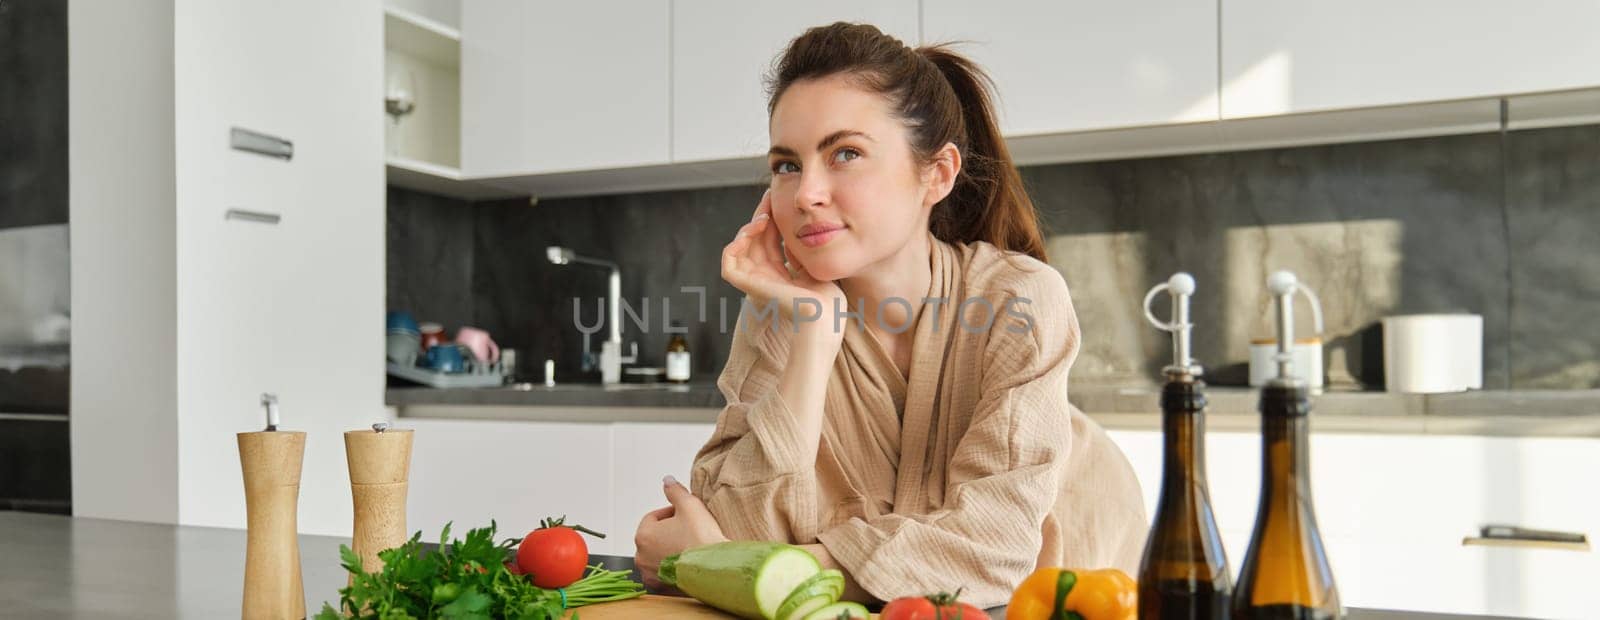 Portrait of pretty woman in bathrobe, standing in kitchen with thoughtful face, posing near vegetables and bottle of oil, thinking what food to prepare, making salad, eating healthy.